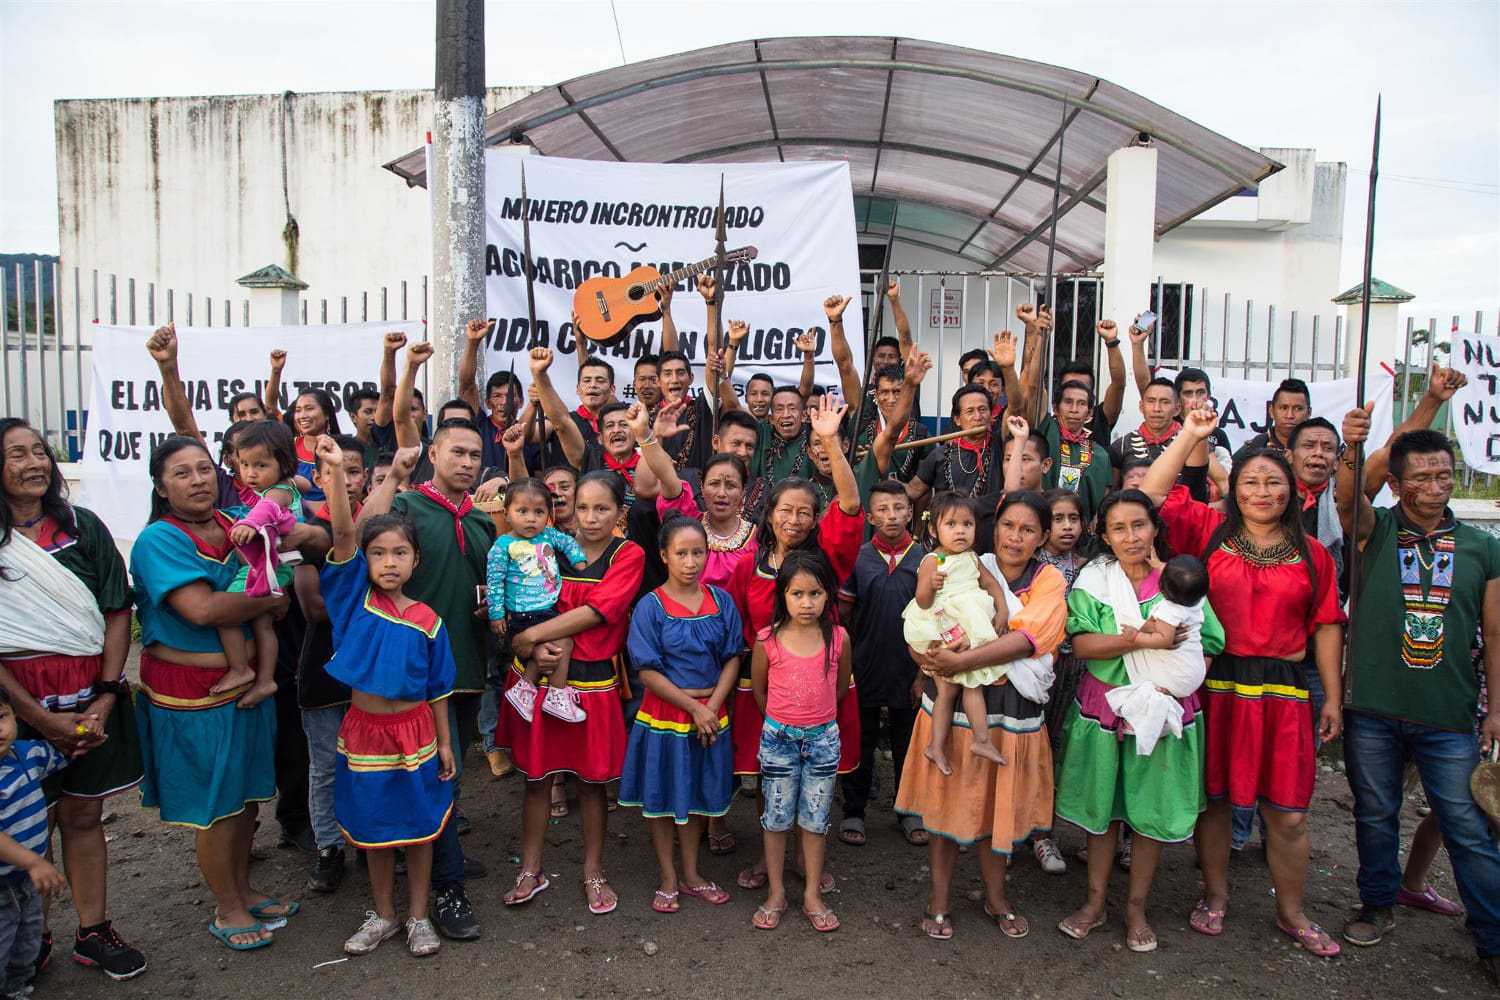 Historic Indigenous Legal Victory Against Gold Mining in the Amazon